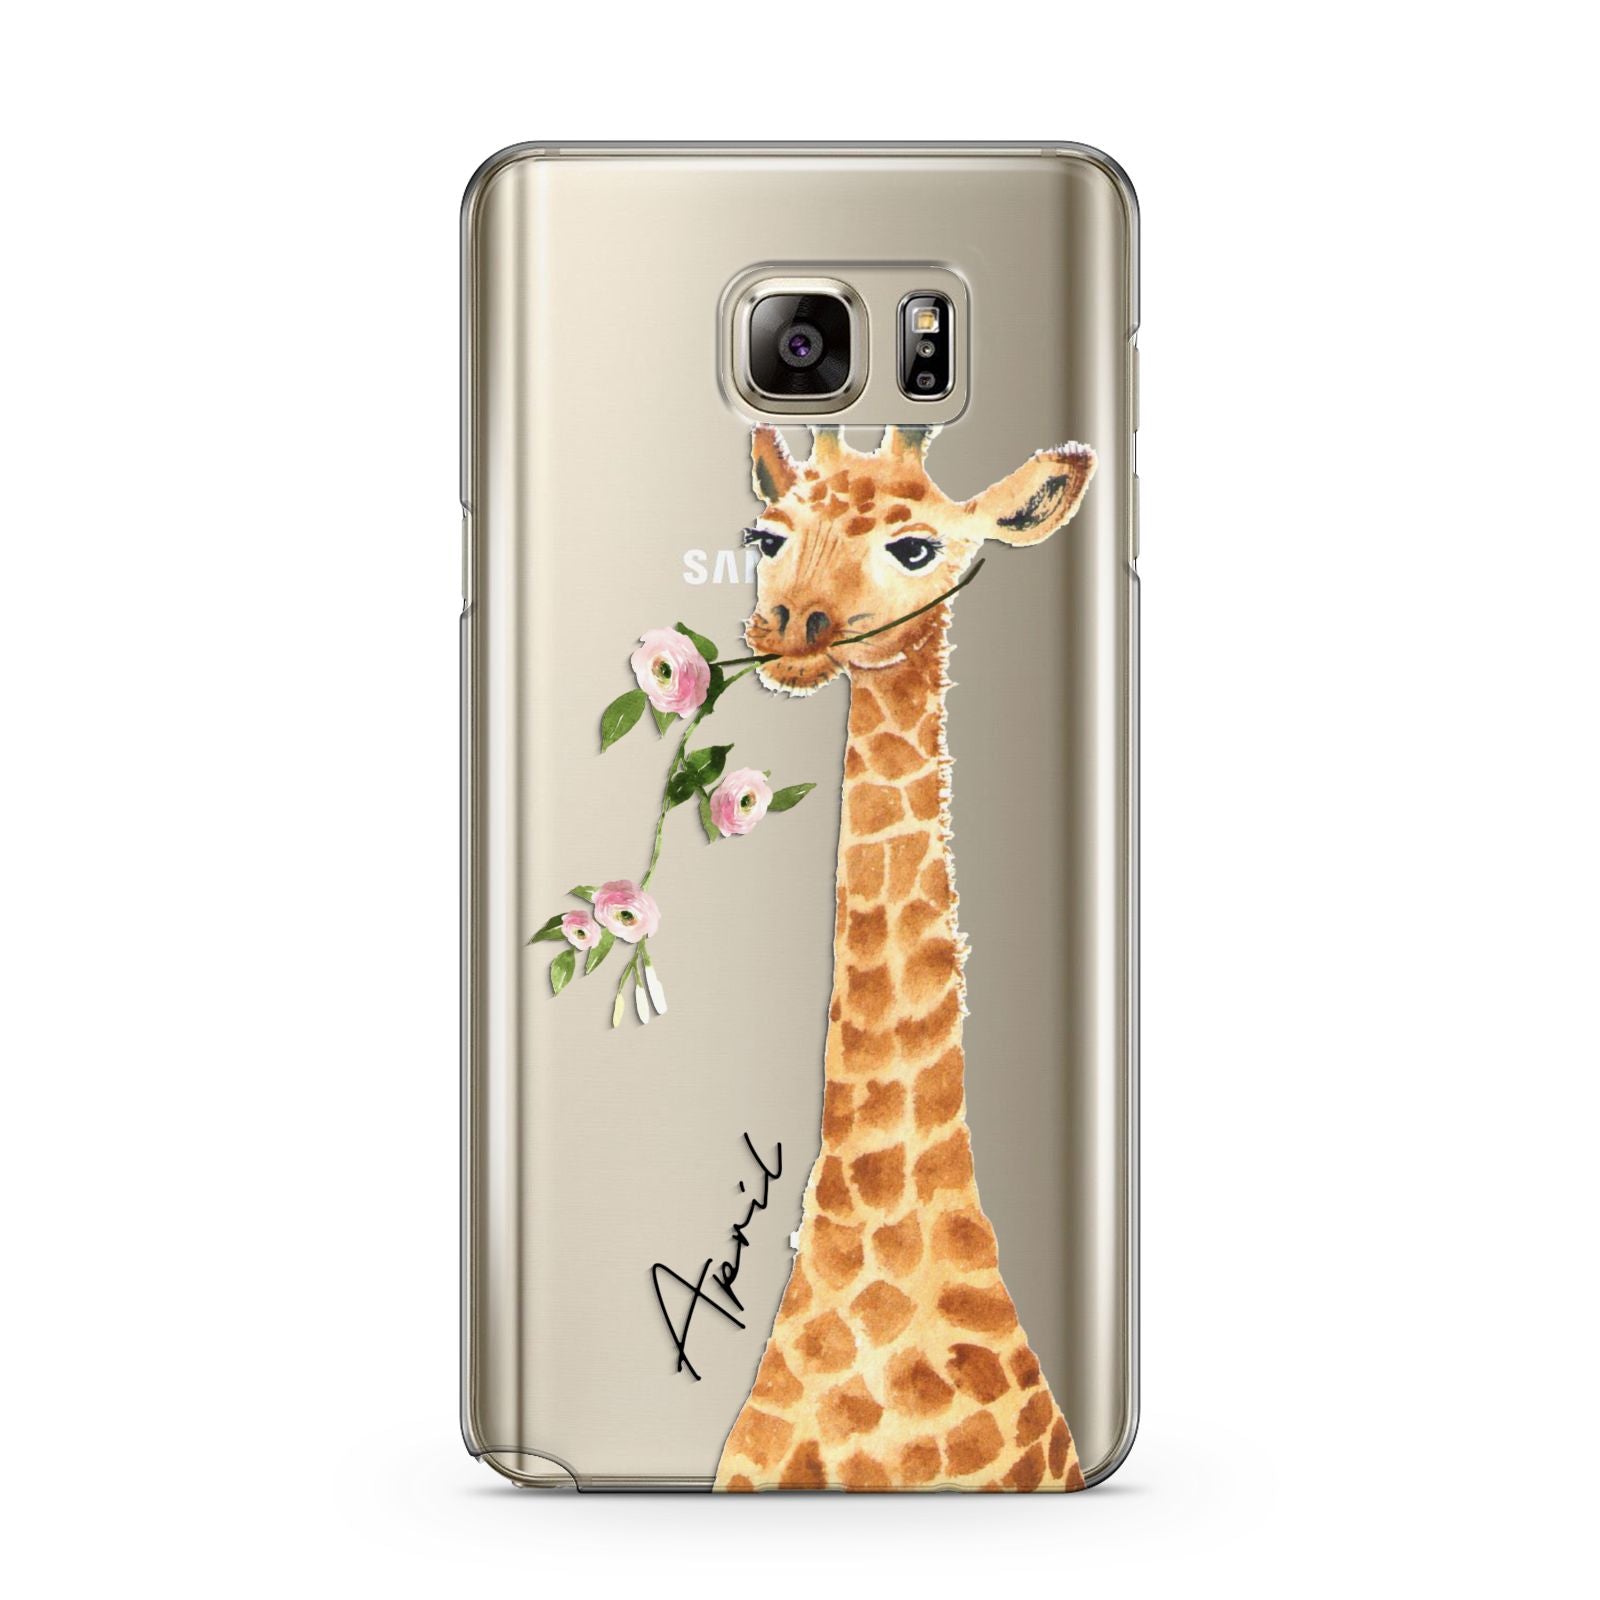 Personalised Giraffe with Name Samsung Galaxy Note 5 Case